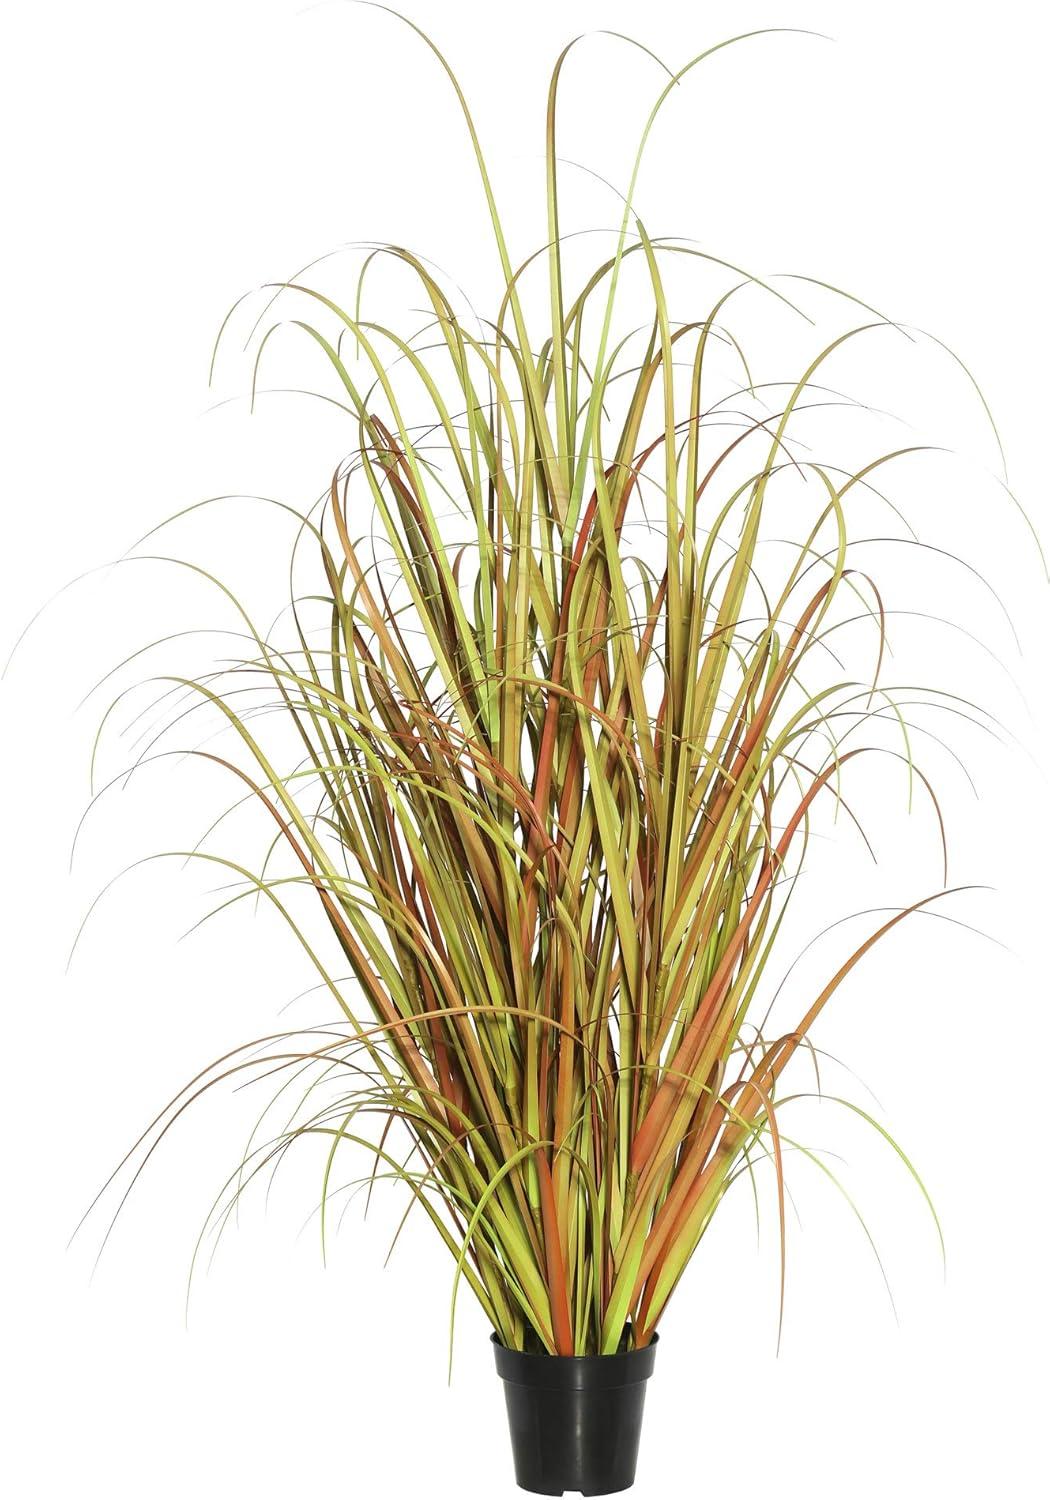 Lifelike Mixed Brown Grass Potted Outdoor Decor with Lights, 50"